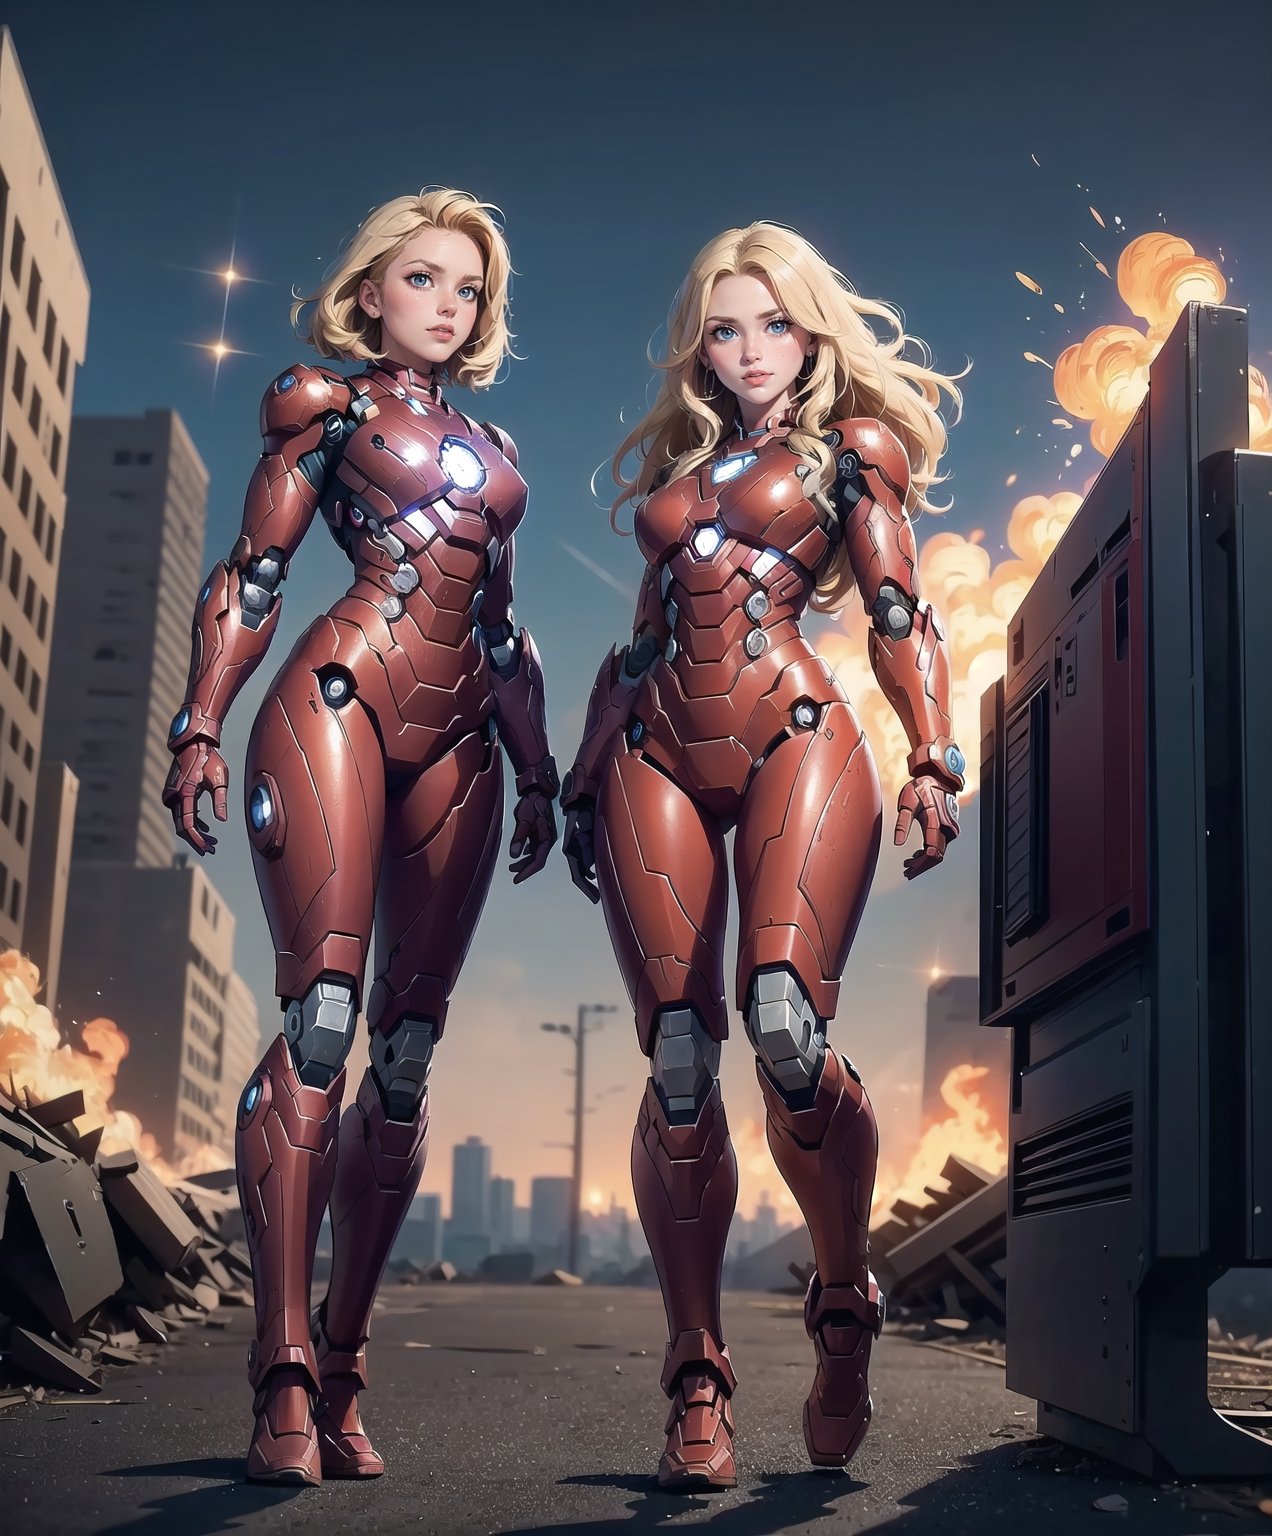 2girls twin sisters, both fighting pose, (masterpiece, top quality, 8K), detailed skin texture, detailed cloth texture, beautiful detailed face, intricate details, ultra Details, both ironman uniform, shine body,swaying middle hair, both blonde hairs, (full body: 1.1), (shy smile),jet flame bursting out from  both hands, jumping up,shining lighting, destroyed city background, evil robot standing,Detailedface,glitter,AGGA_ST002